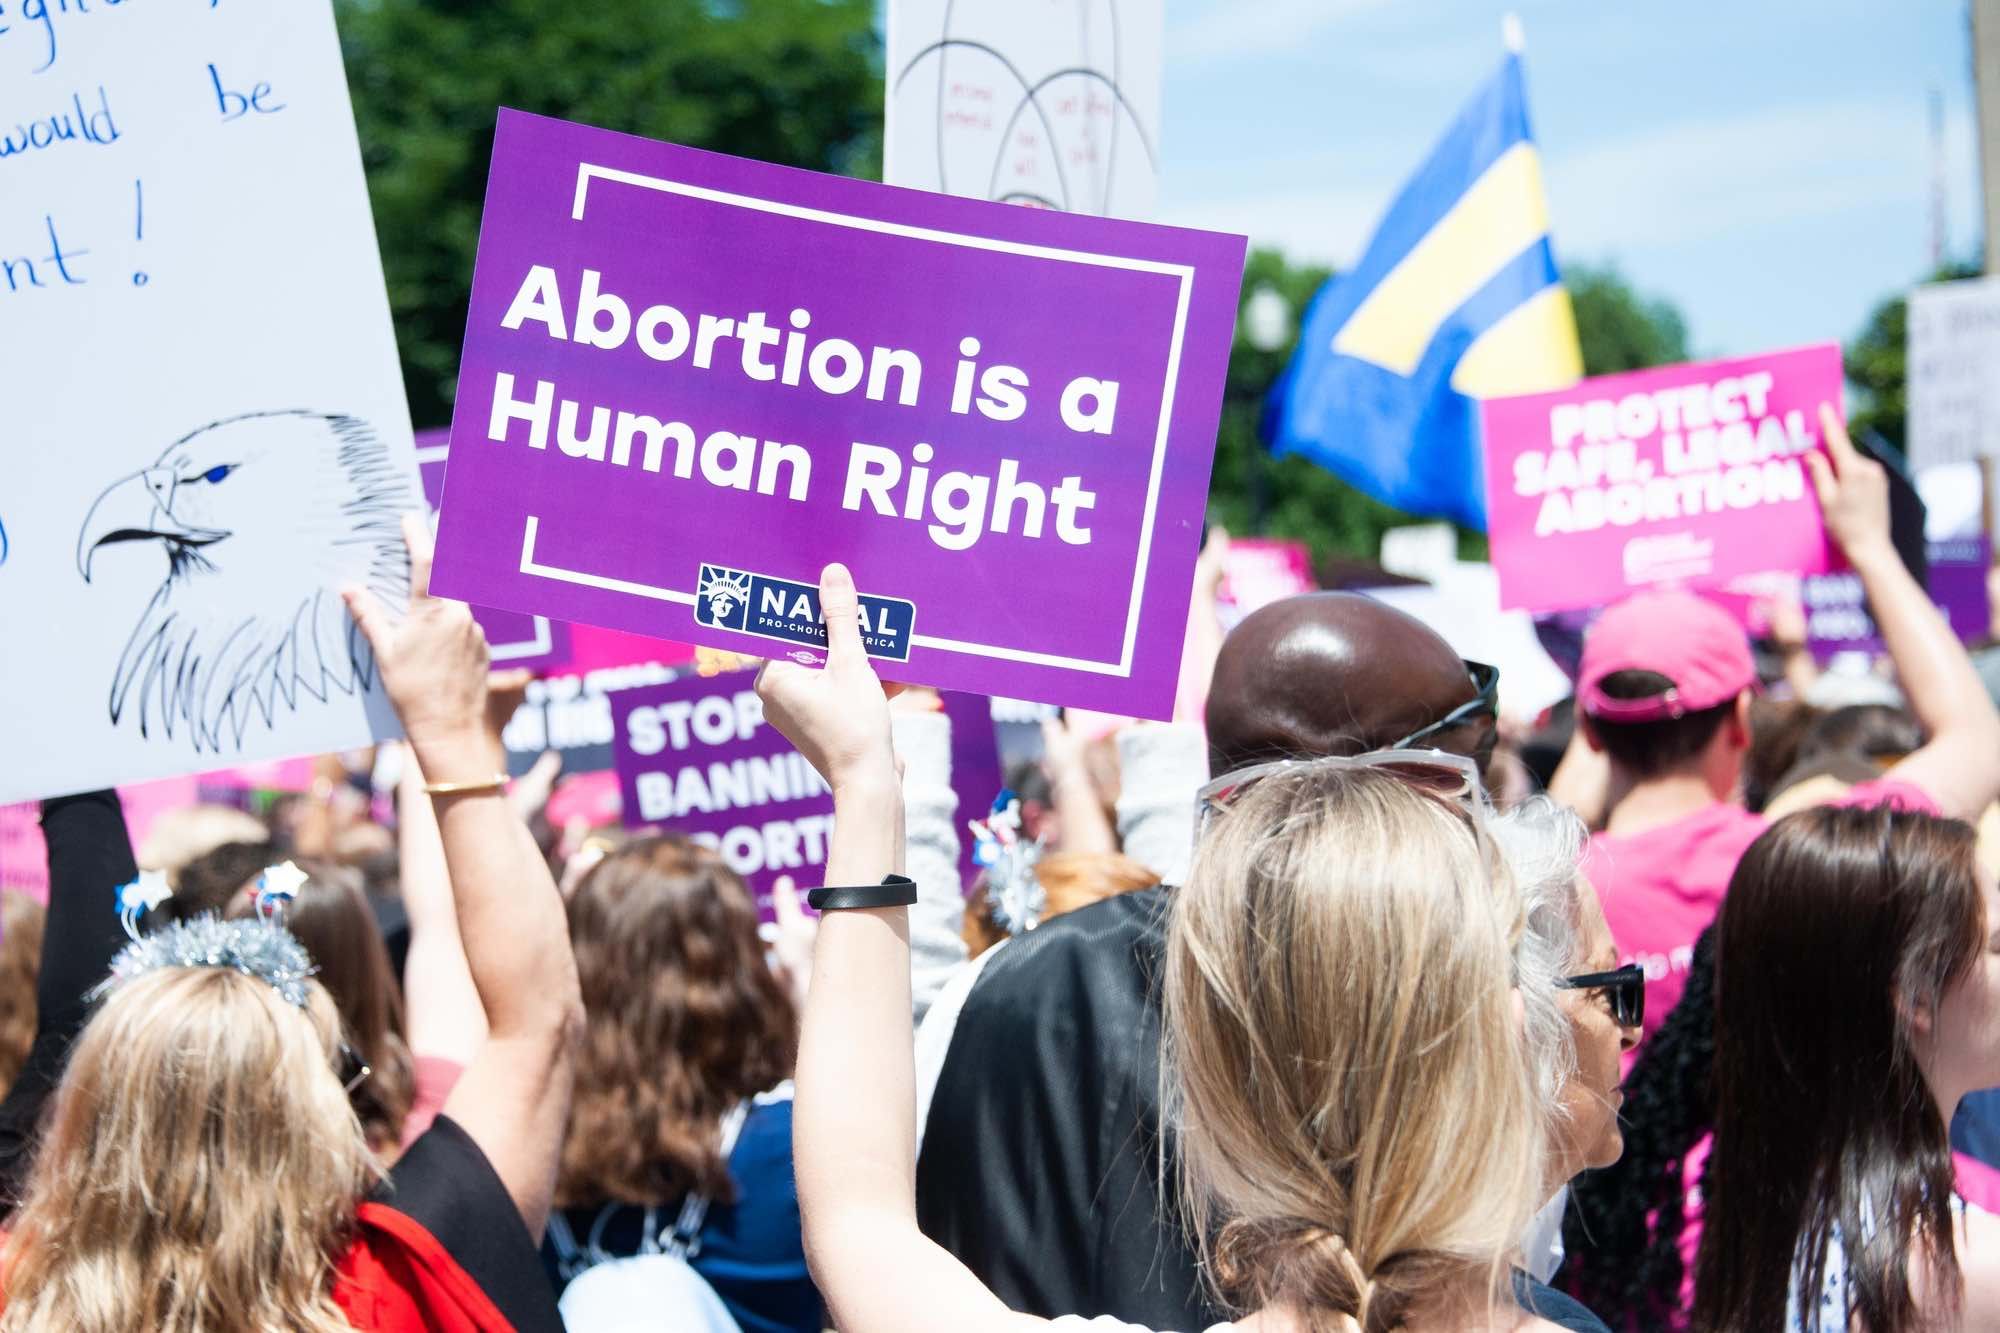 Abortion is a human right poster